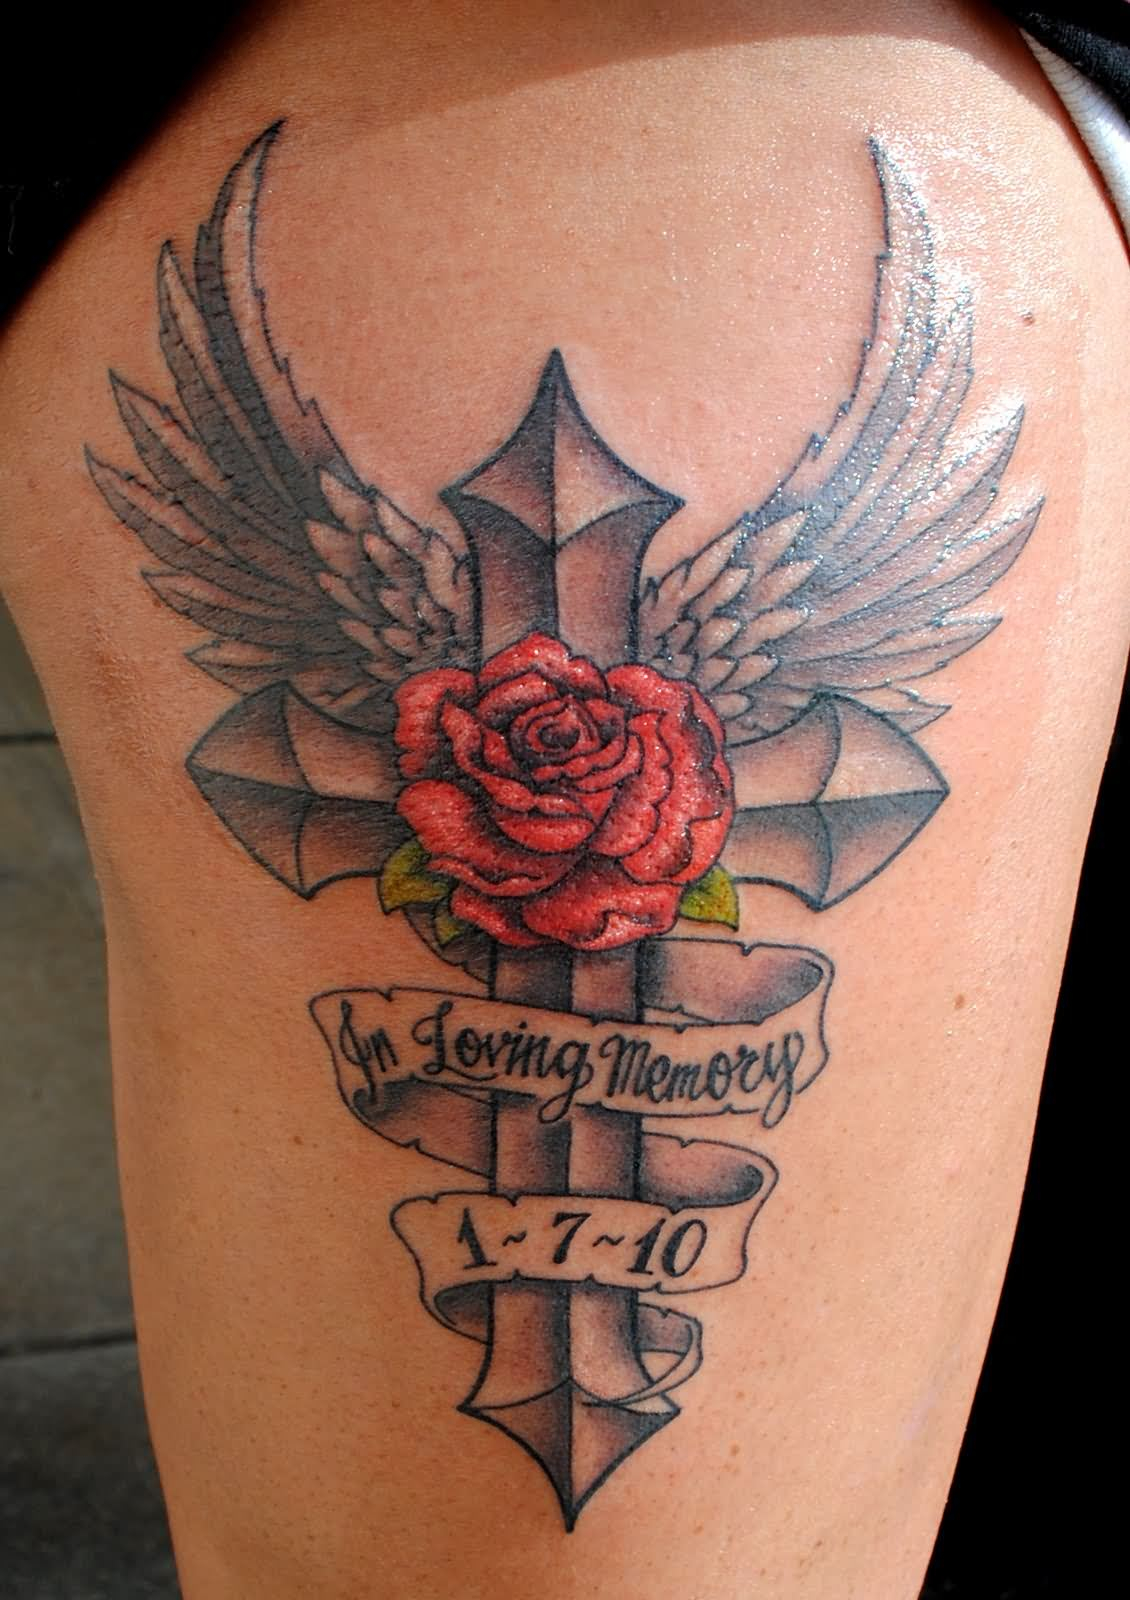 In Loving Memory With Cross Angel Wings Tattoo throughout dimensions 1130 X 1600